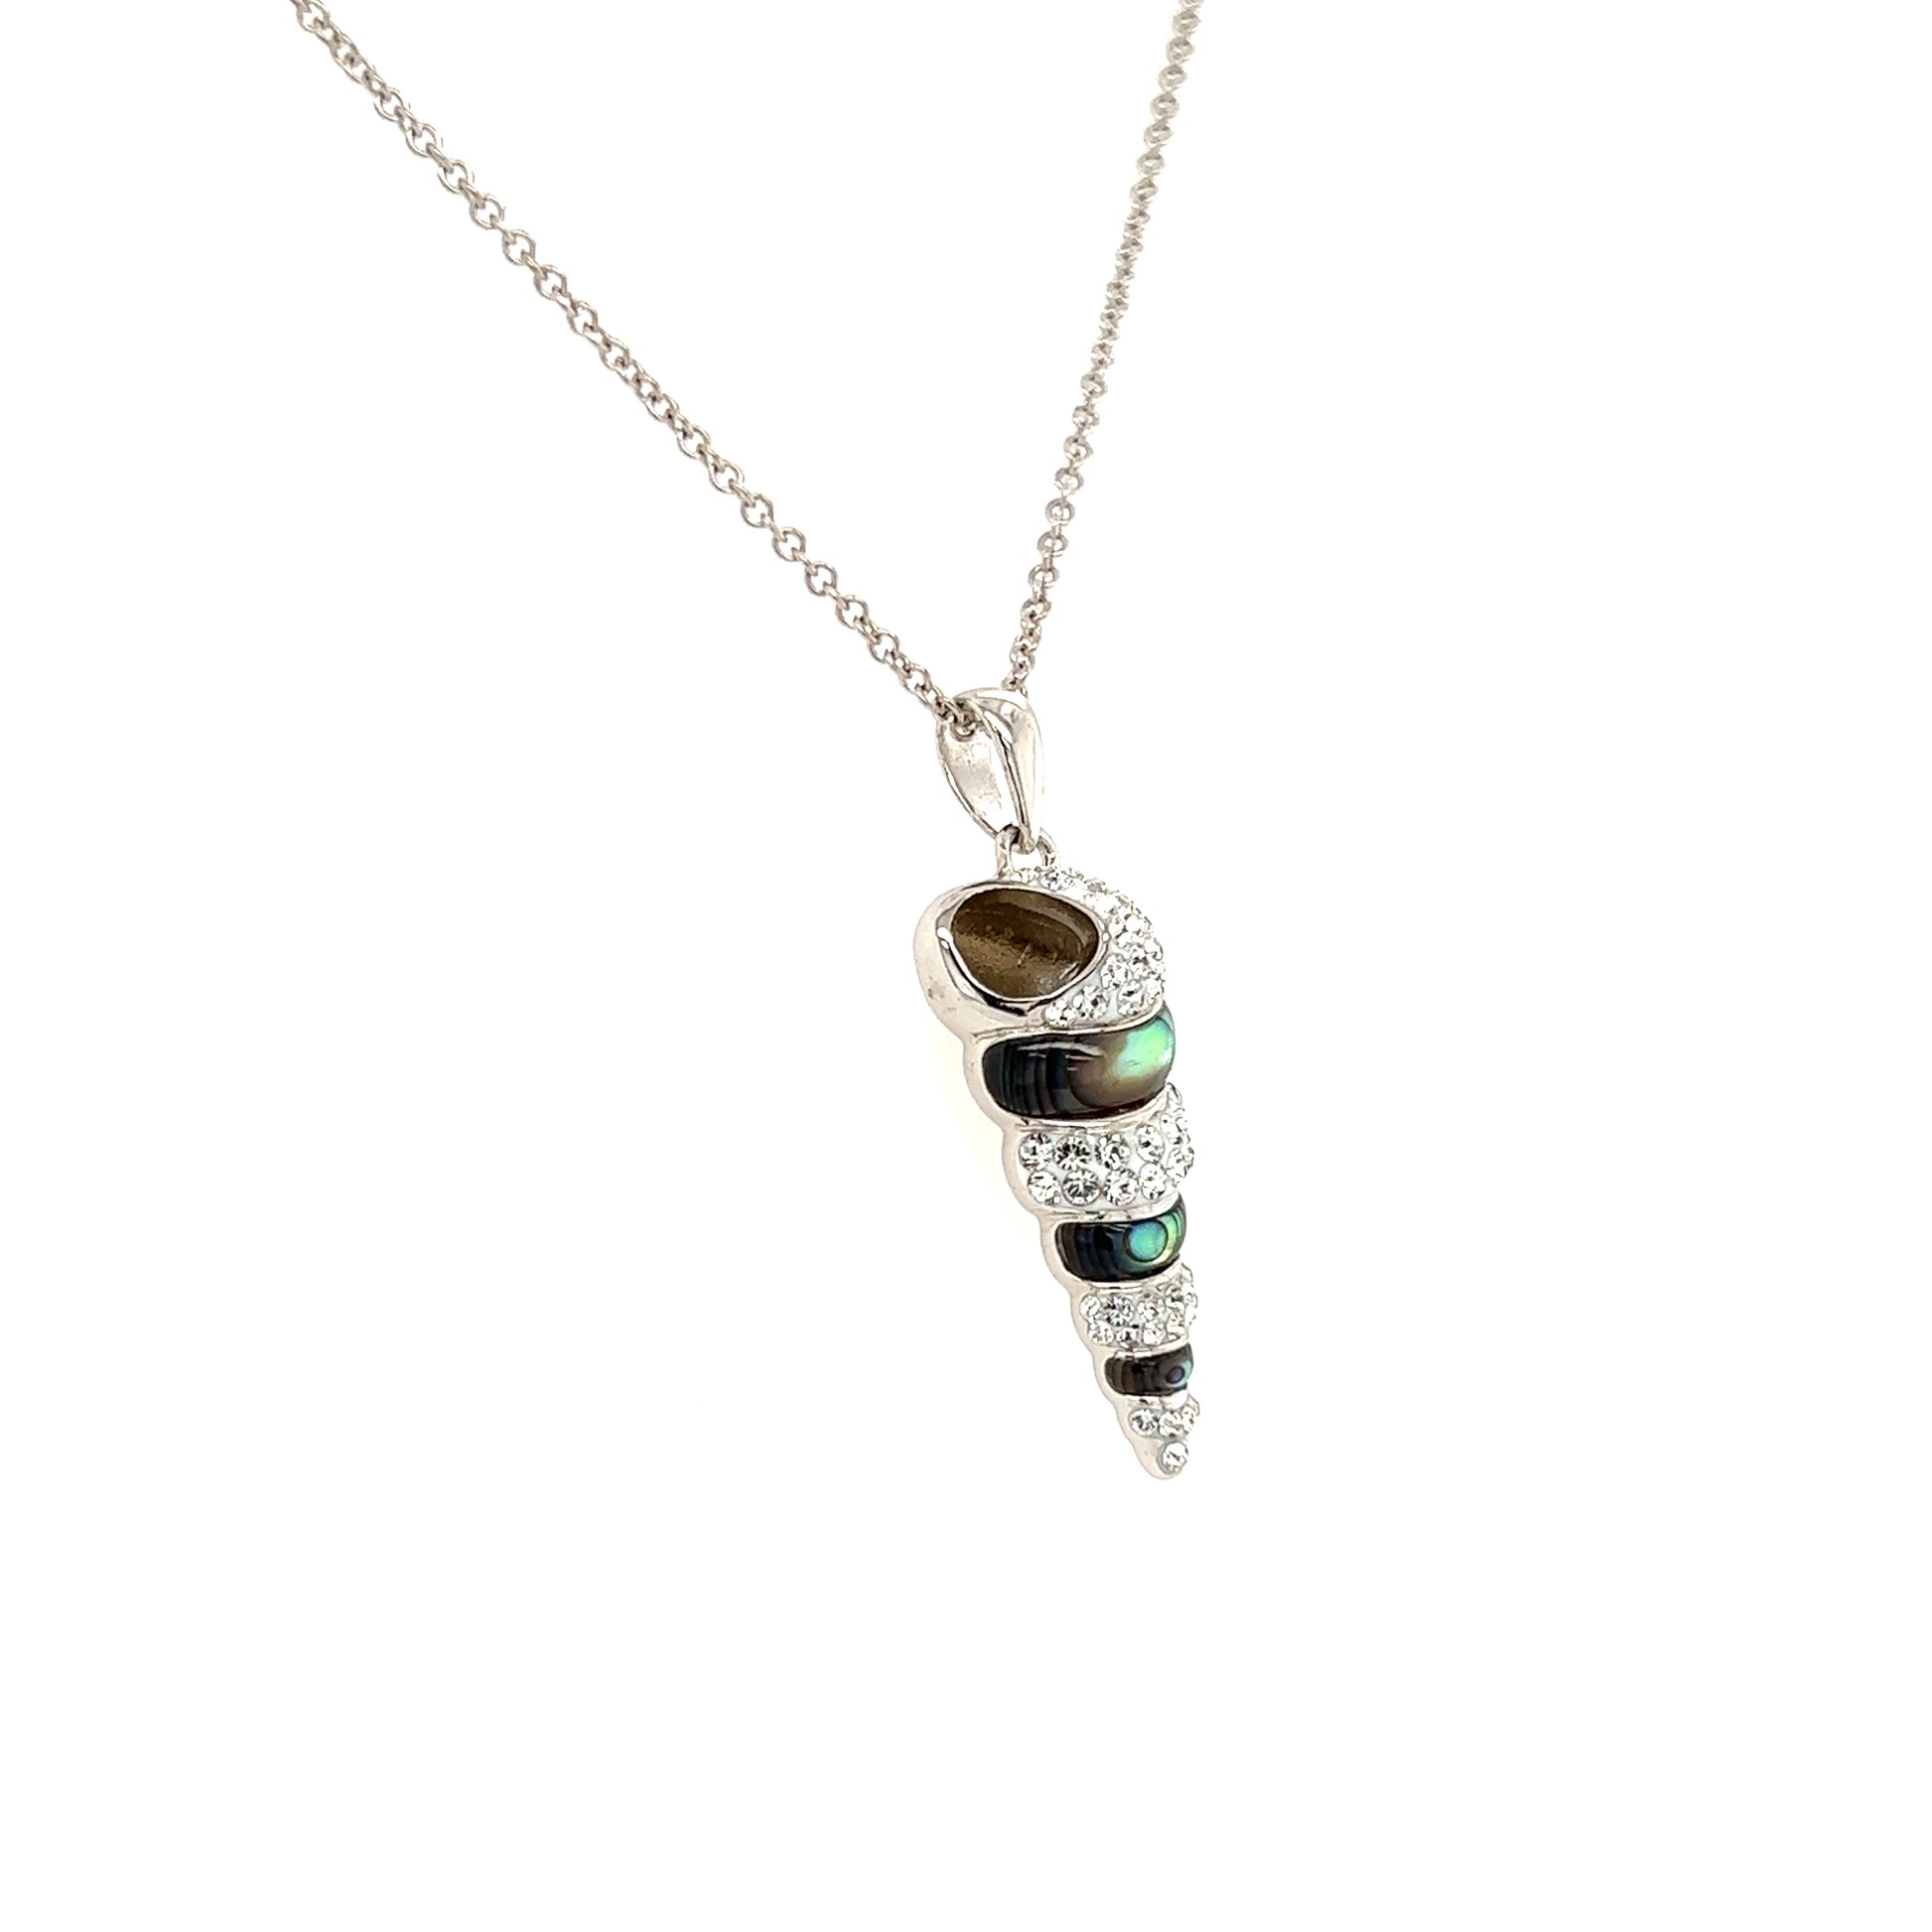 Abalone Shell Necklace with Swarovski Crystals in Sterling Silver Left Side View